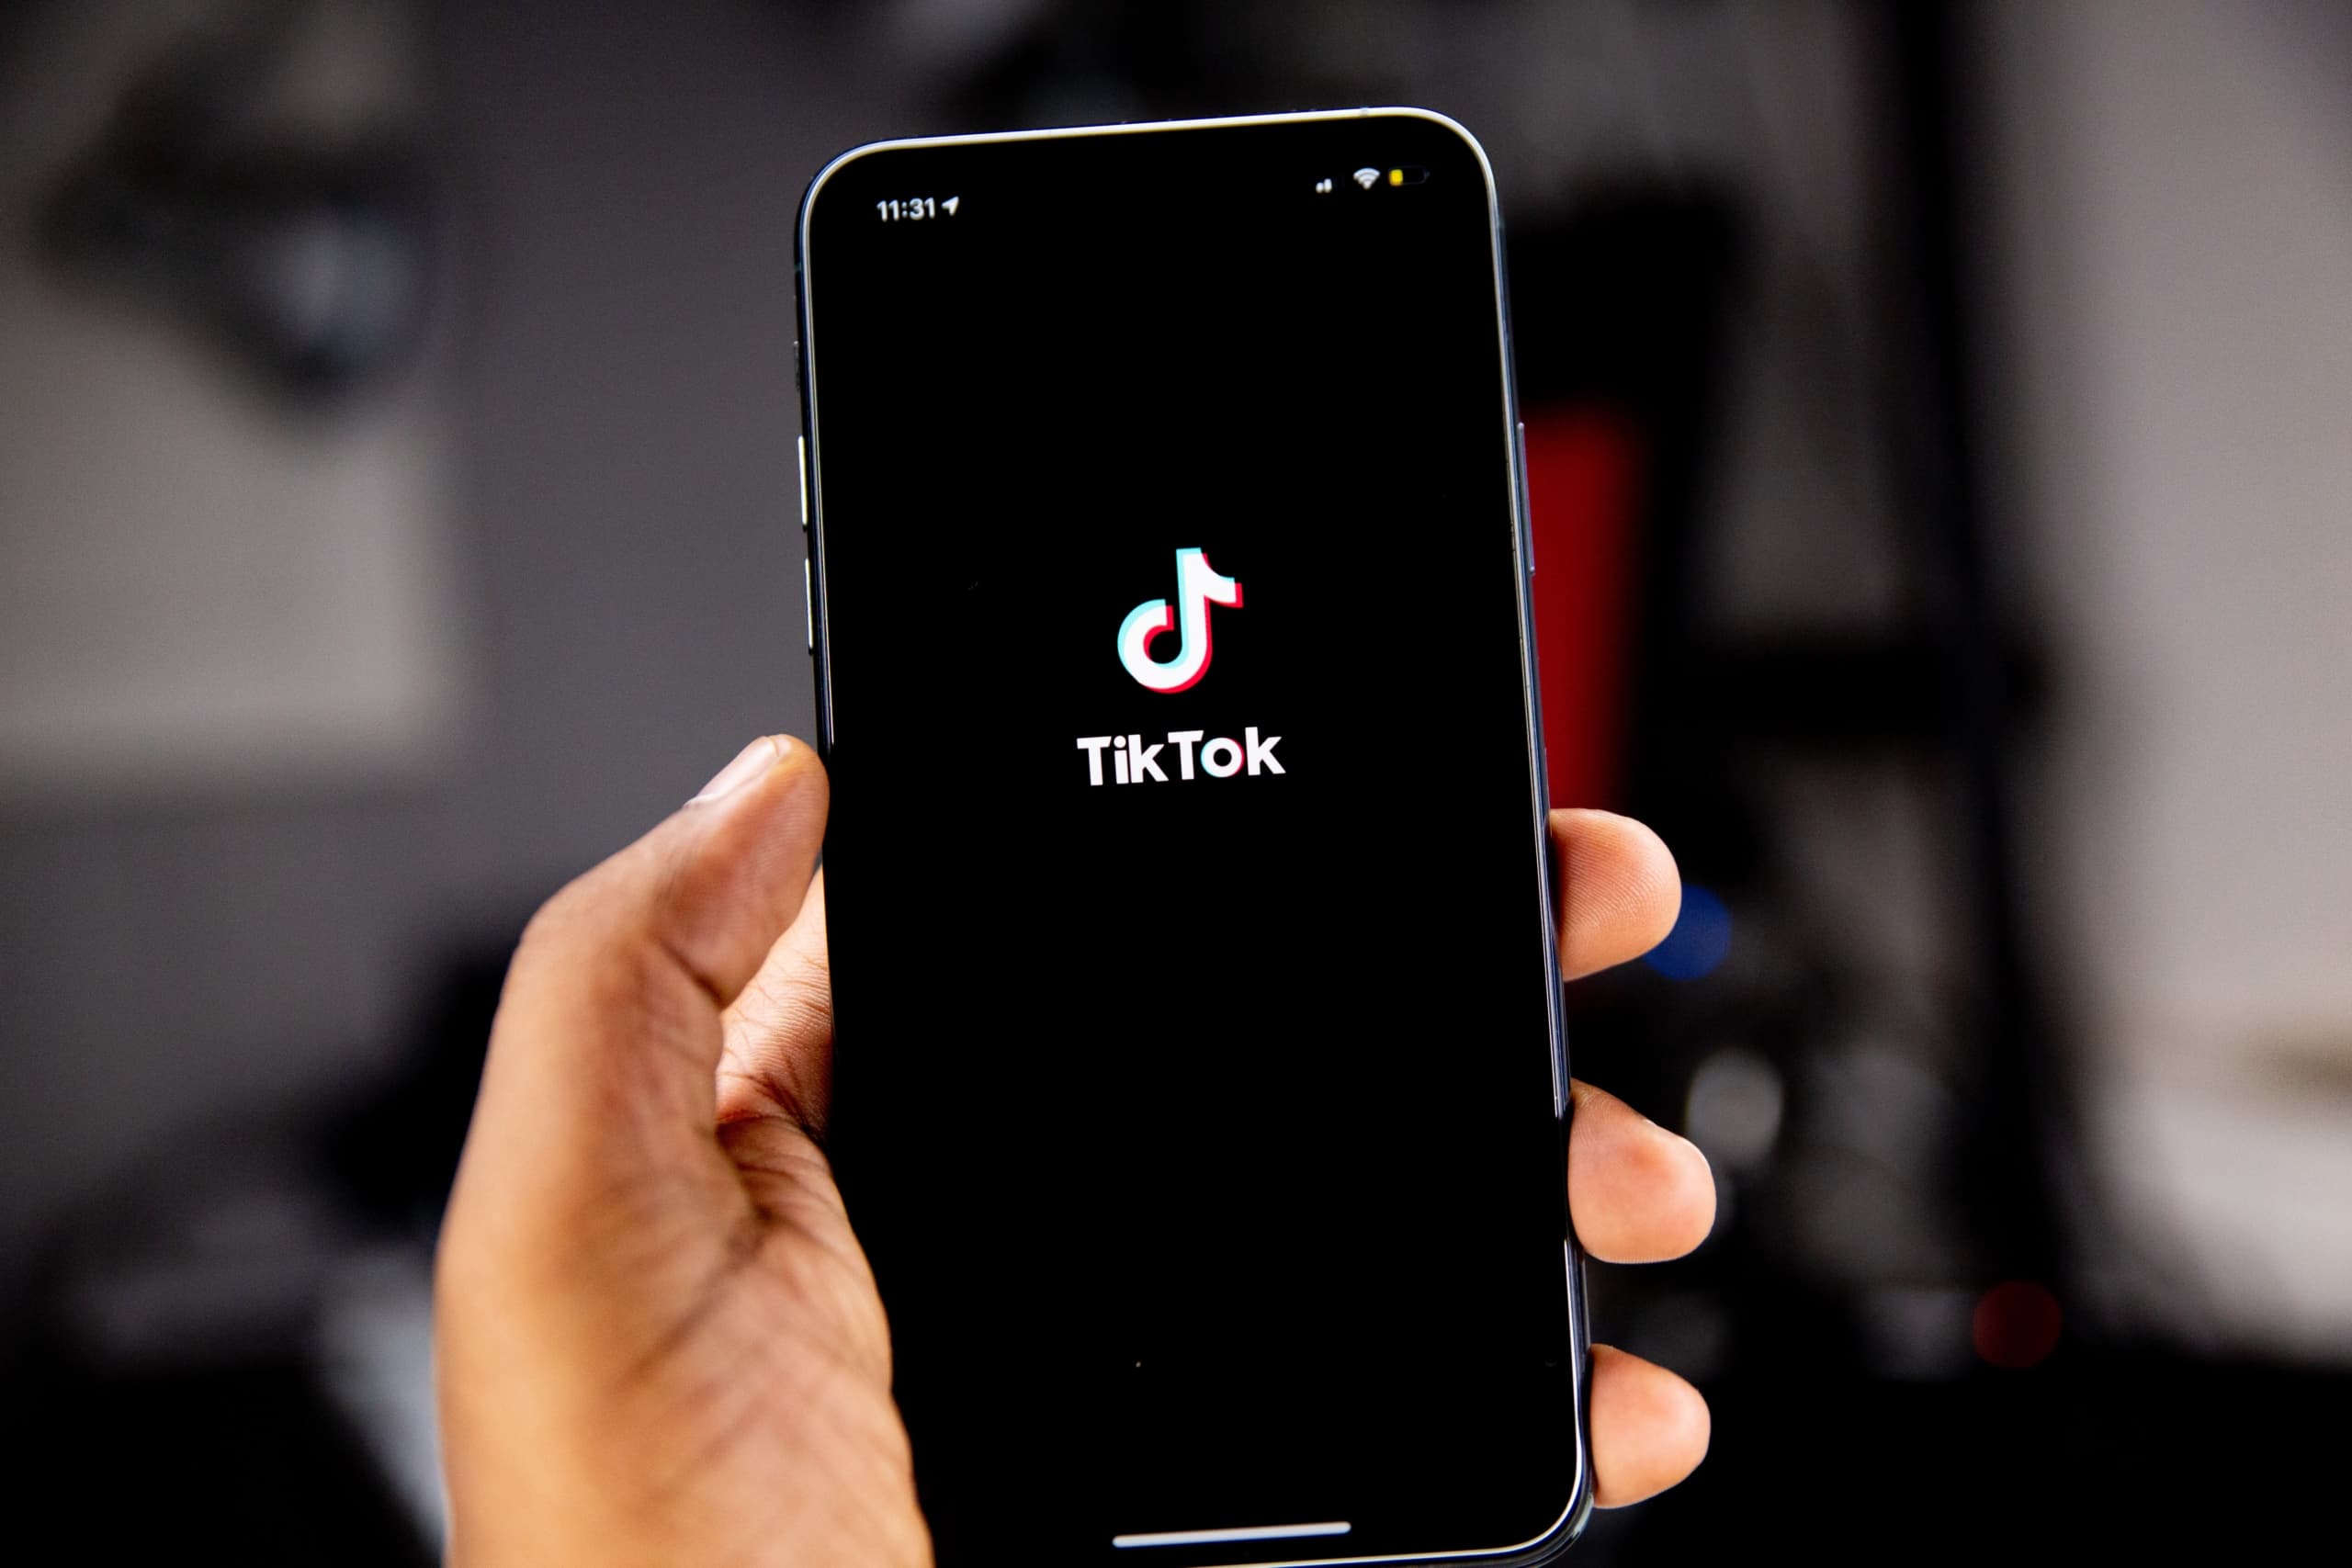 TikTok logo on a phone held in a hand